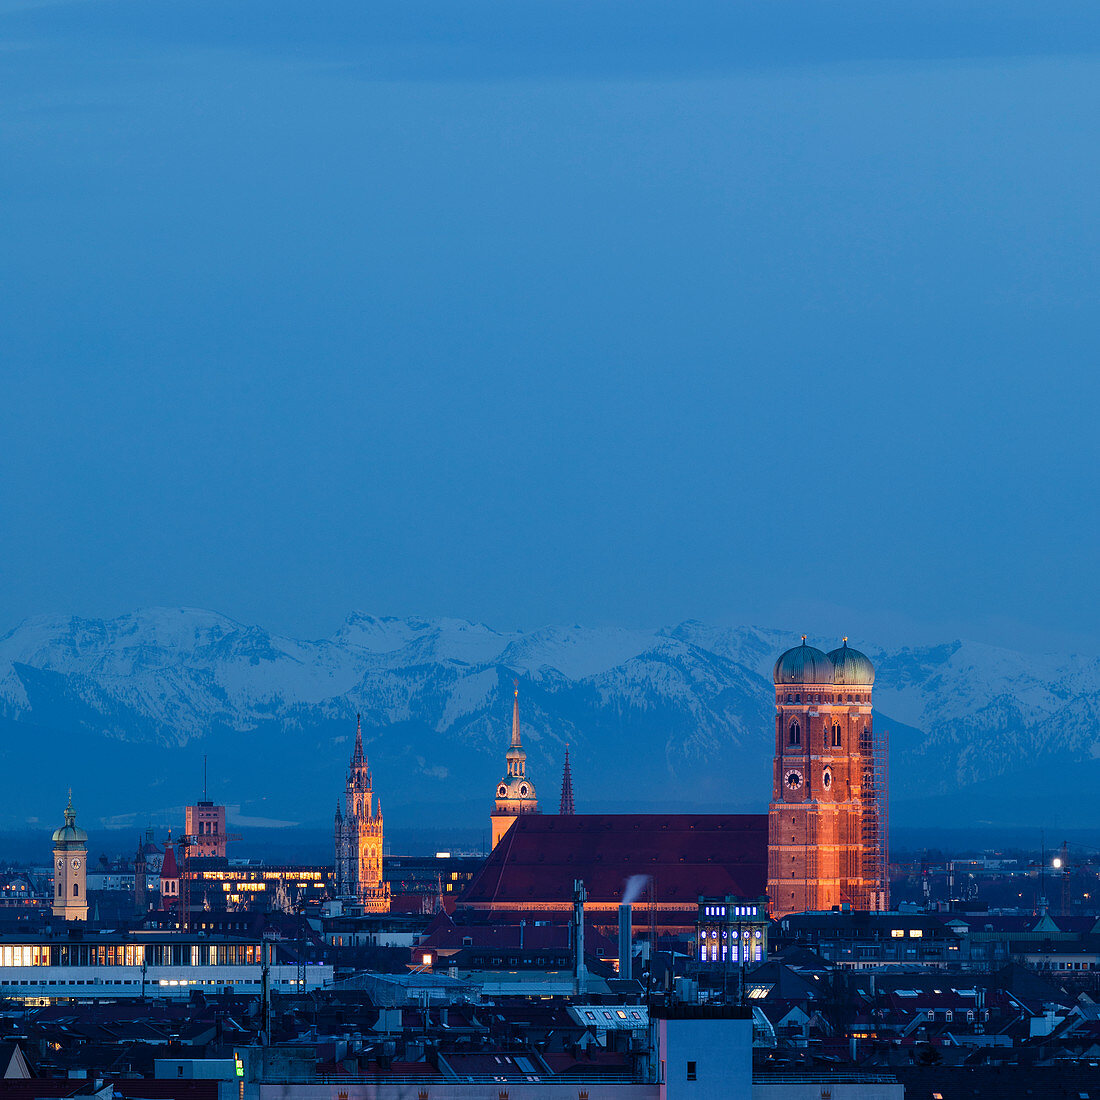 Munich city skyline with illuminated Frauenkirche and snowy Alps in the background at night